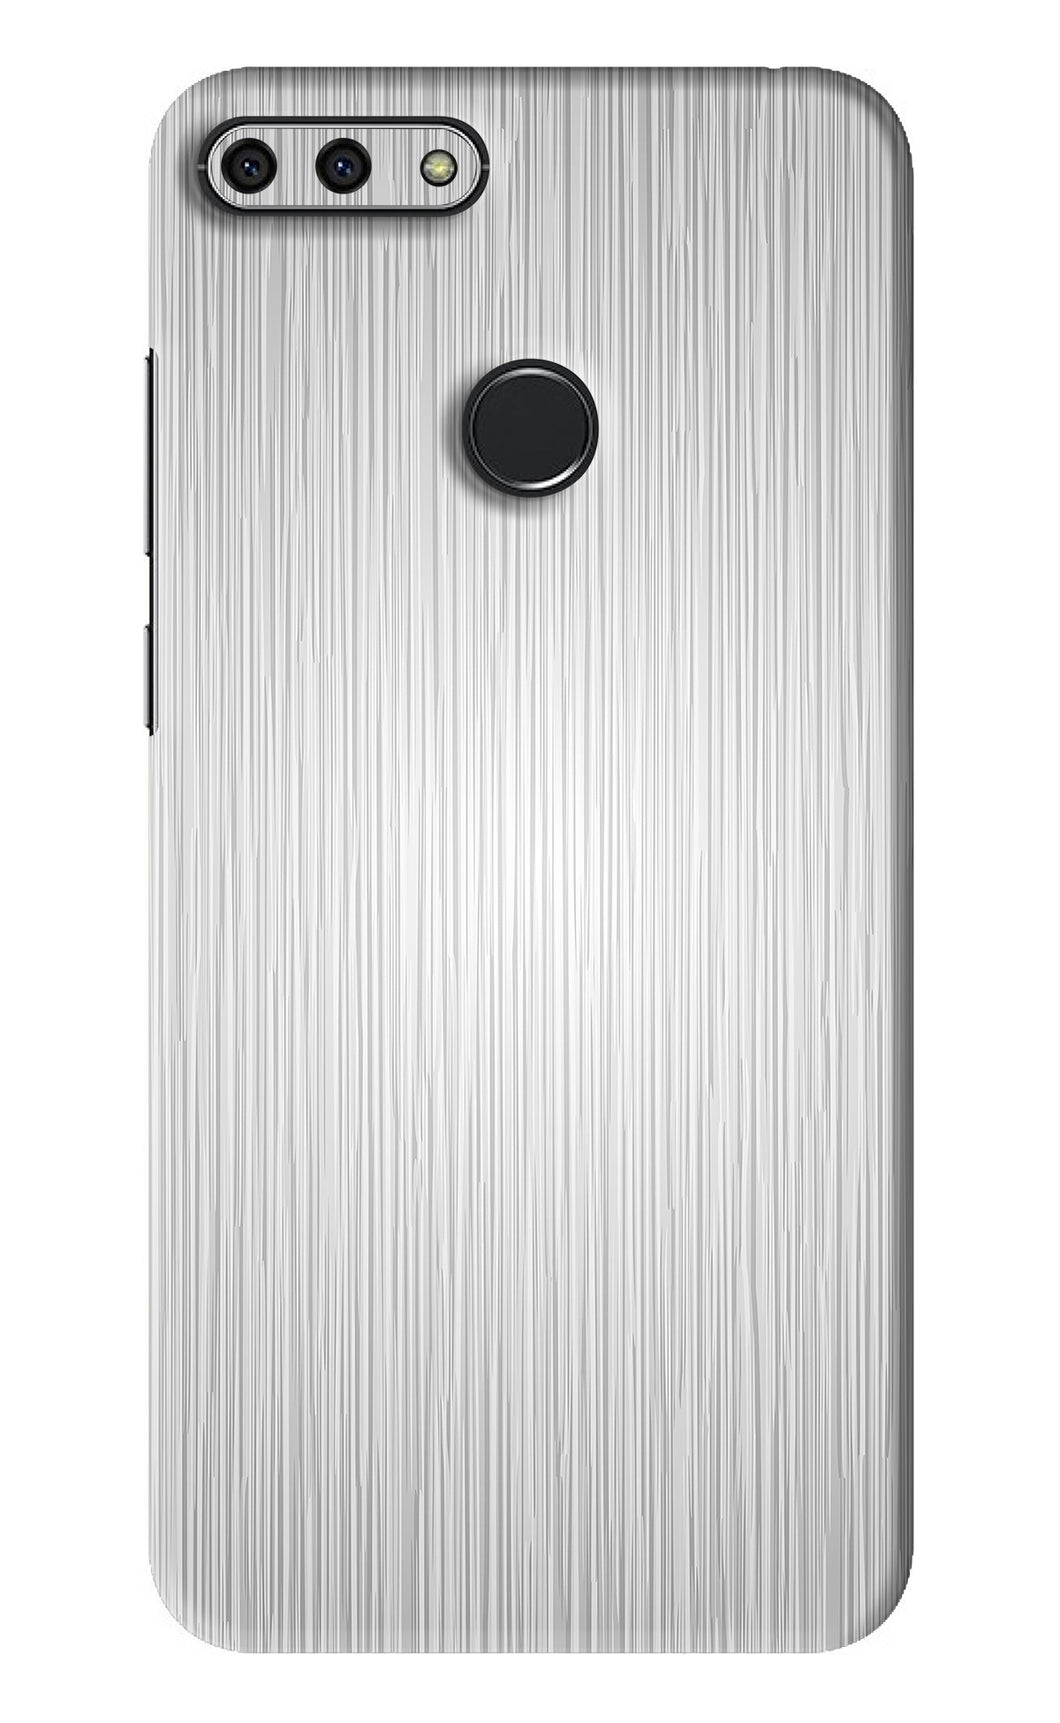 Wooden Grey Texture Huawei Honor 7A Back Skin Wrap